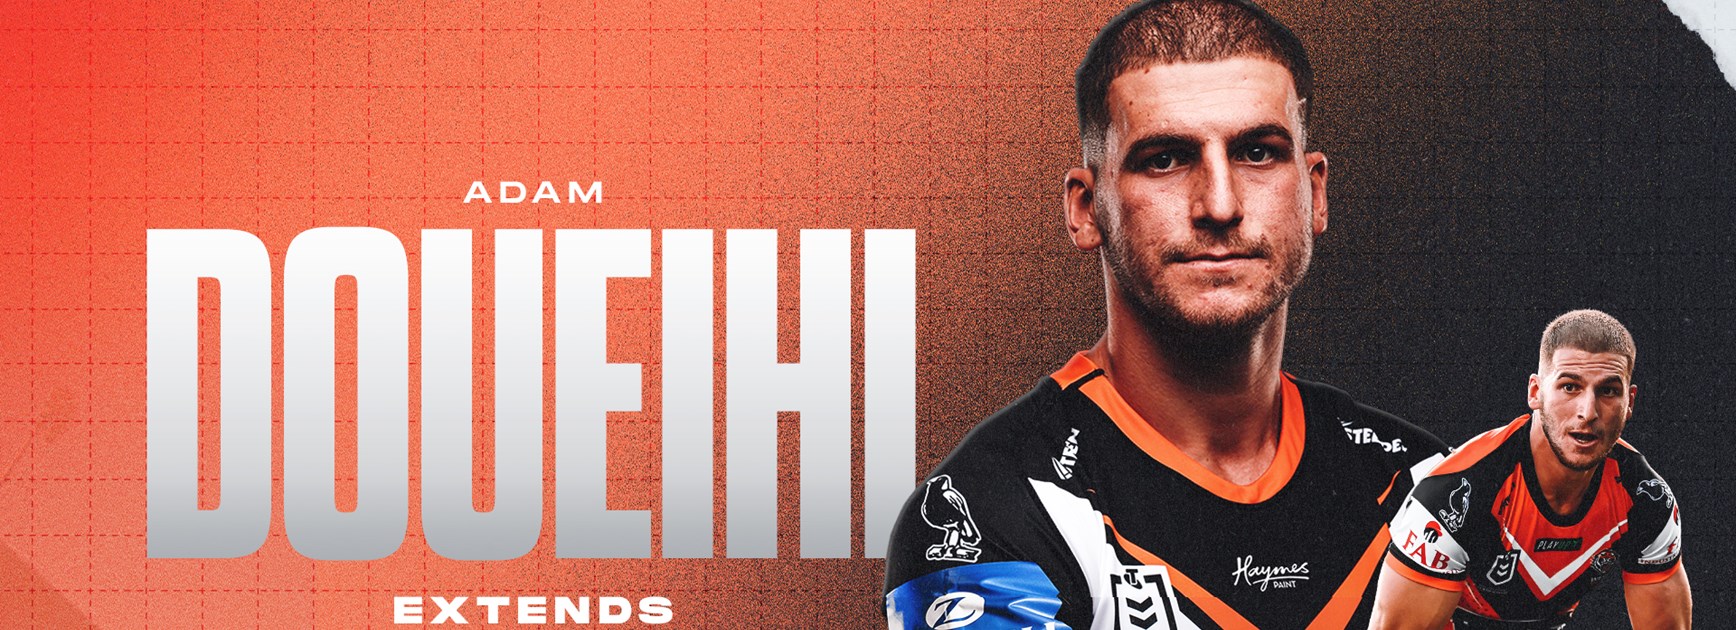 Doueihi extends his stay at Wests Tigers | Wests Tigers